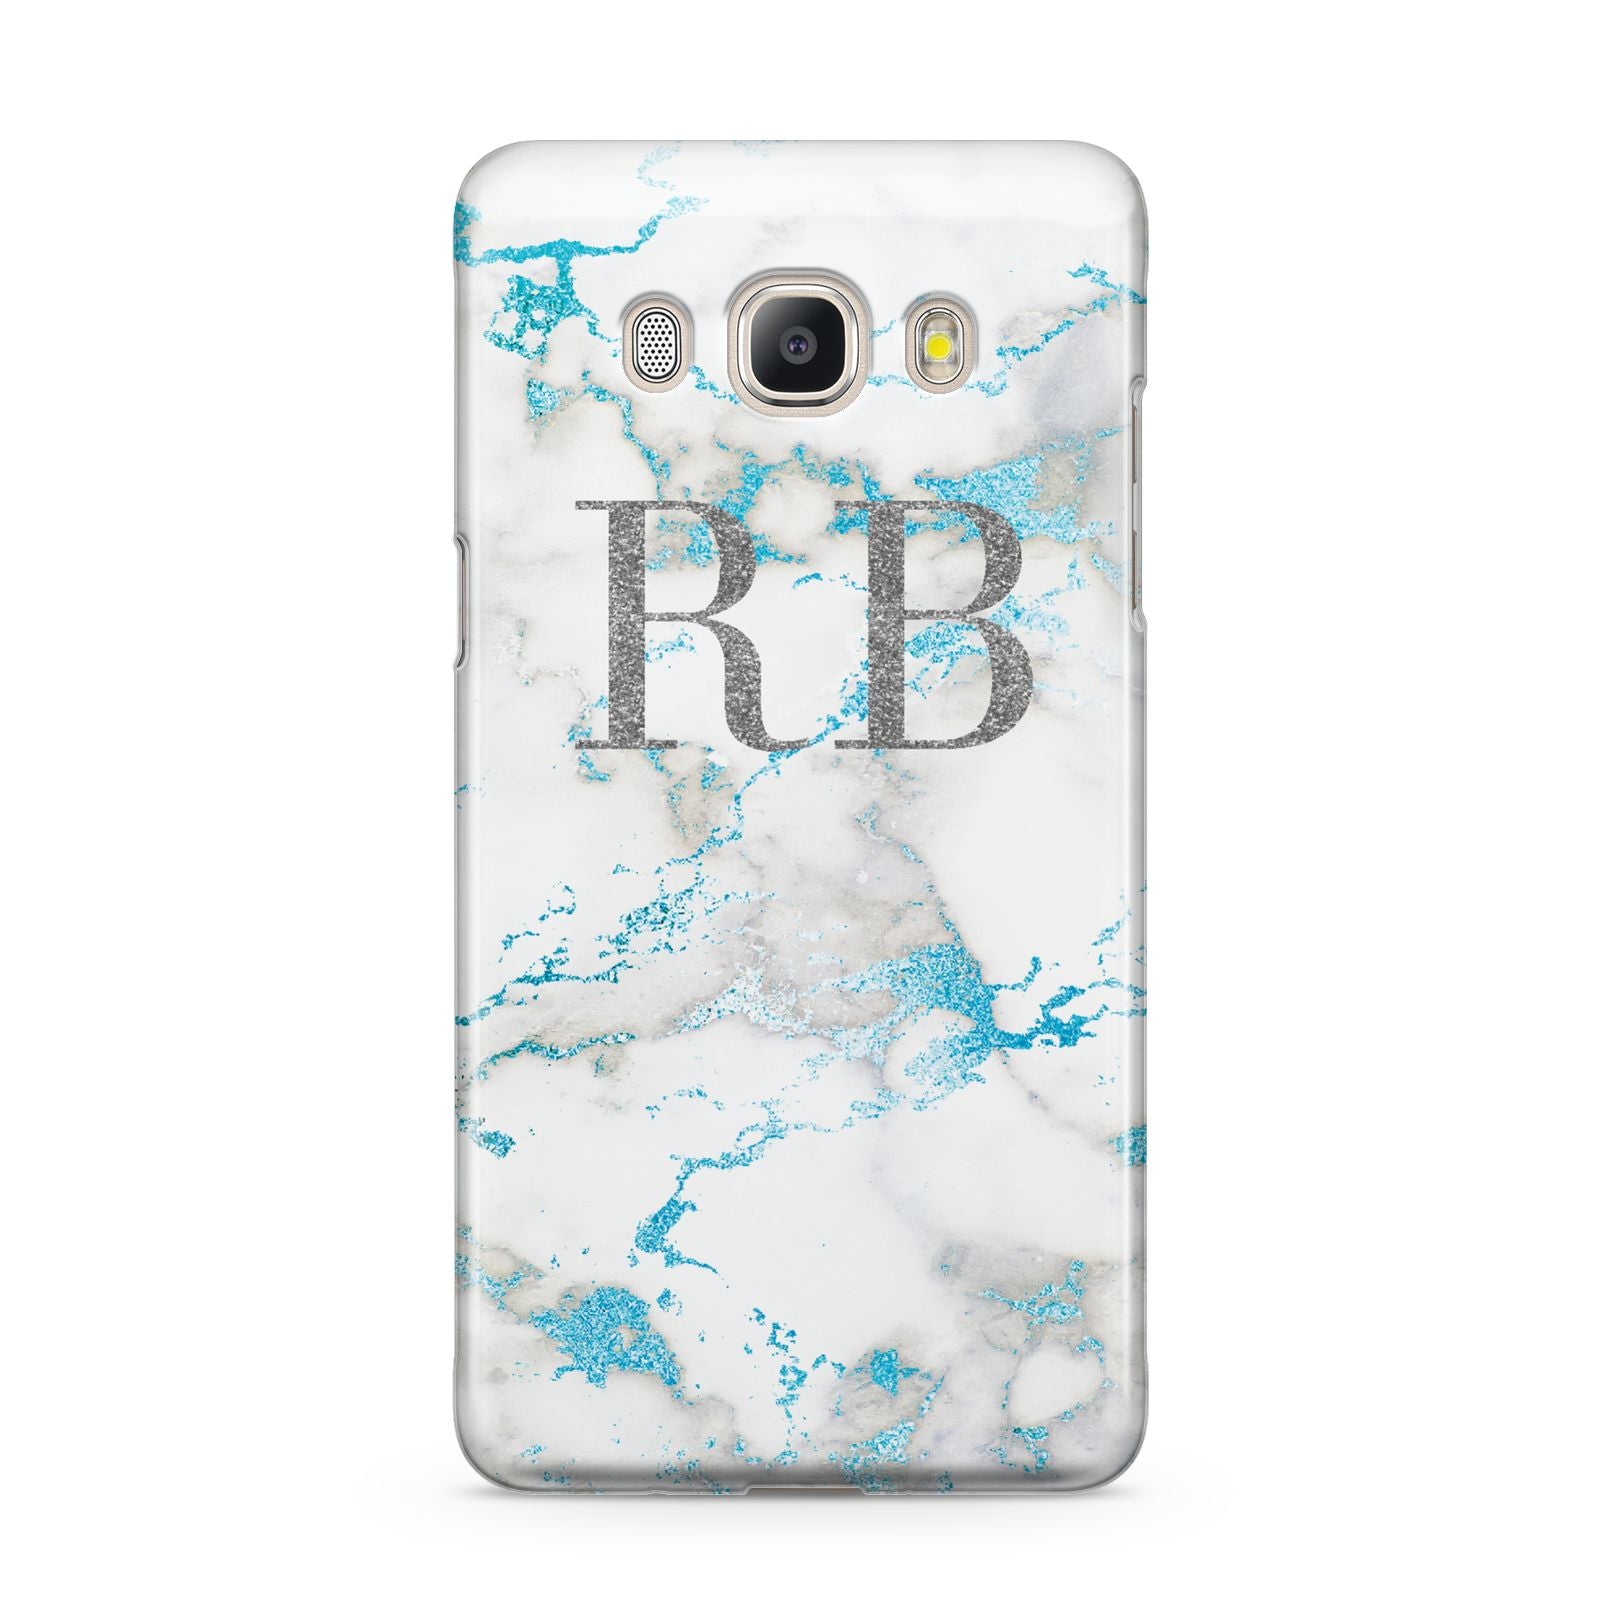 Personalised Blue Marble Initials Samsung Galaxy J5 2016 Case